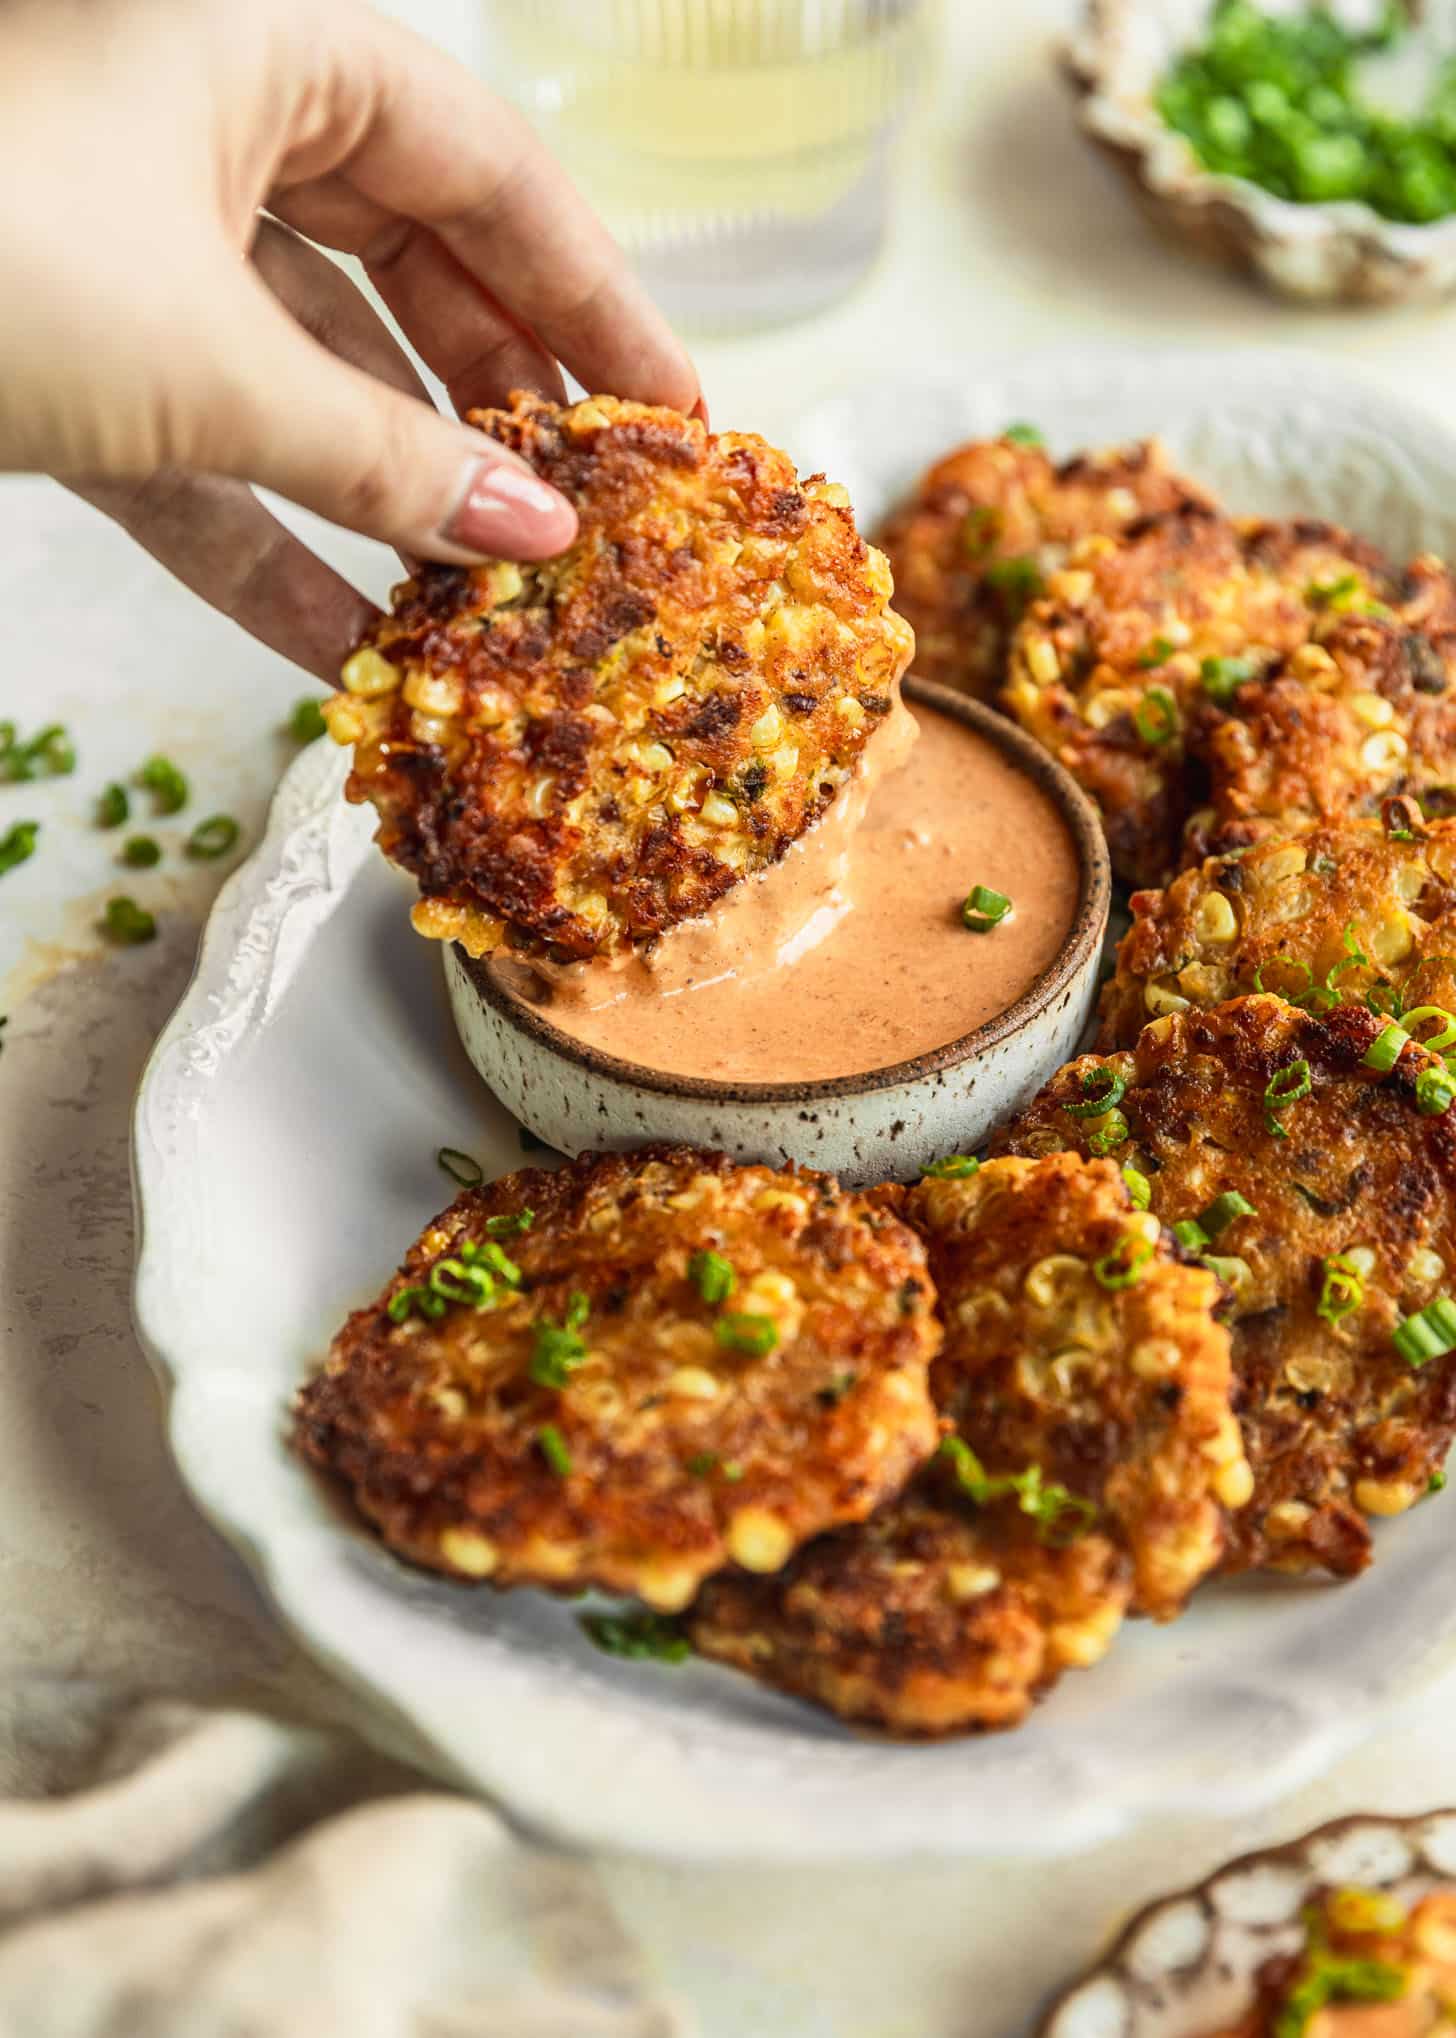 A hand dipping a fritter into a brown and white bowl of chipotle aioli on a white tray of corn and bacon fritters. The tray is on a beige counter next to a beige linen, glass of wine, and brown bowl of green onions.